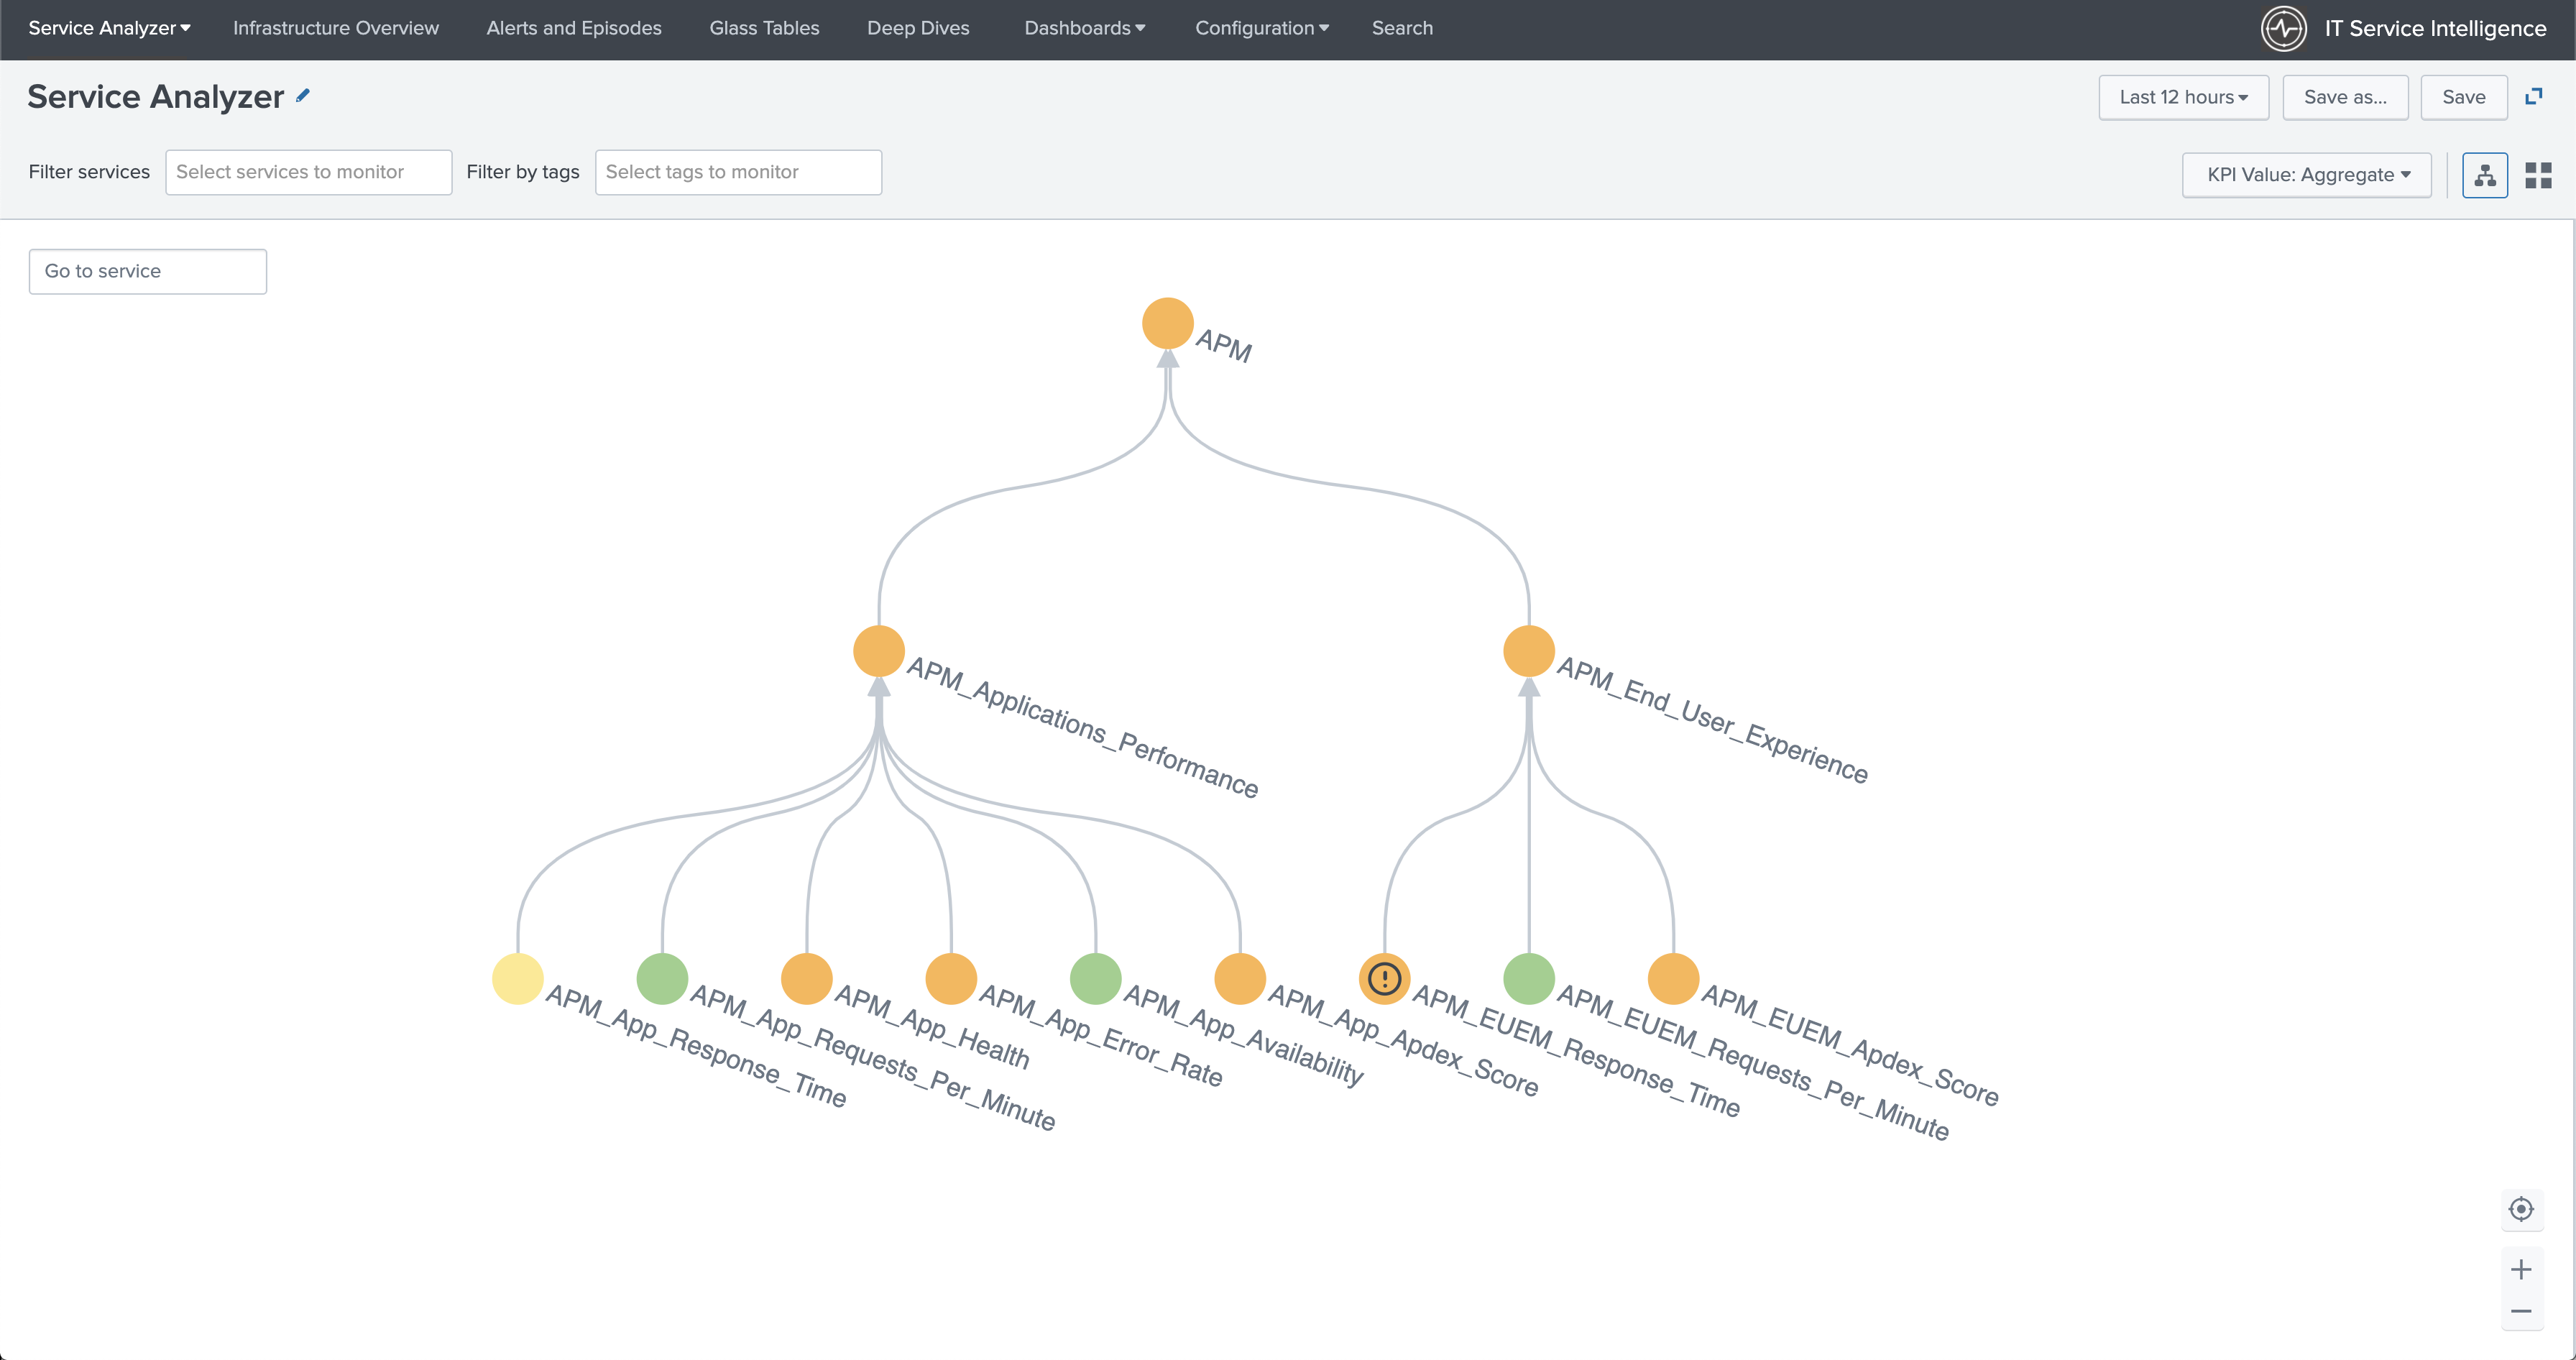 This image shows the Service Analyzer page populated with example data. The content is displayed as a topology tree. There are also several available filters at the top of the page including a filter by tags view.